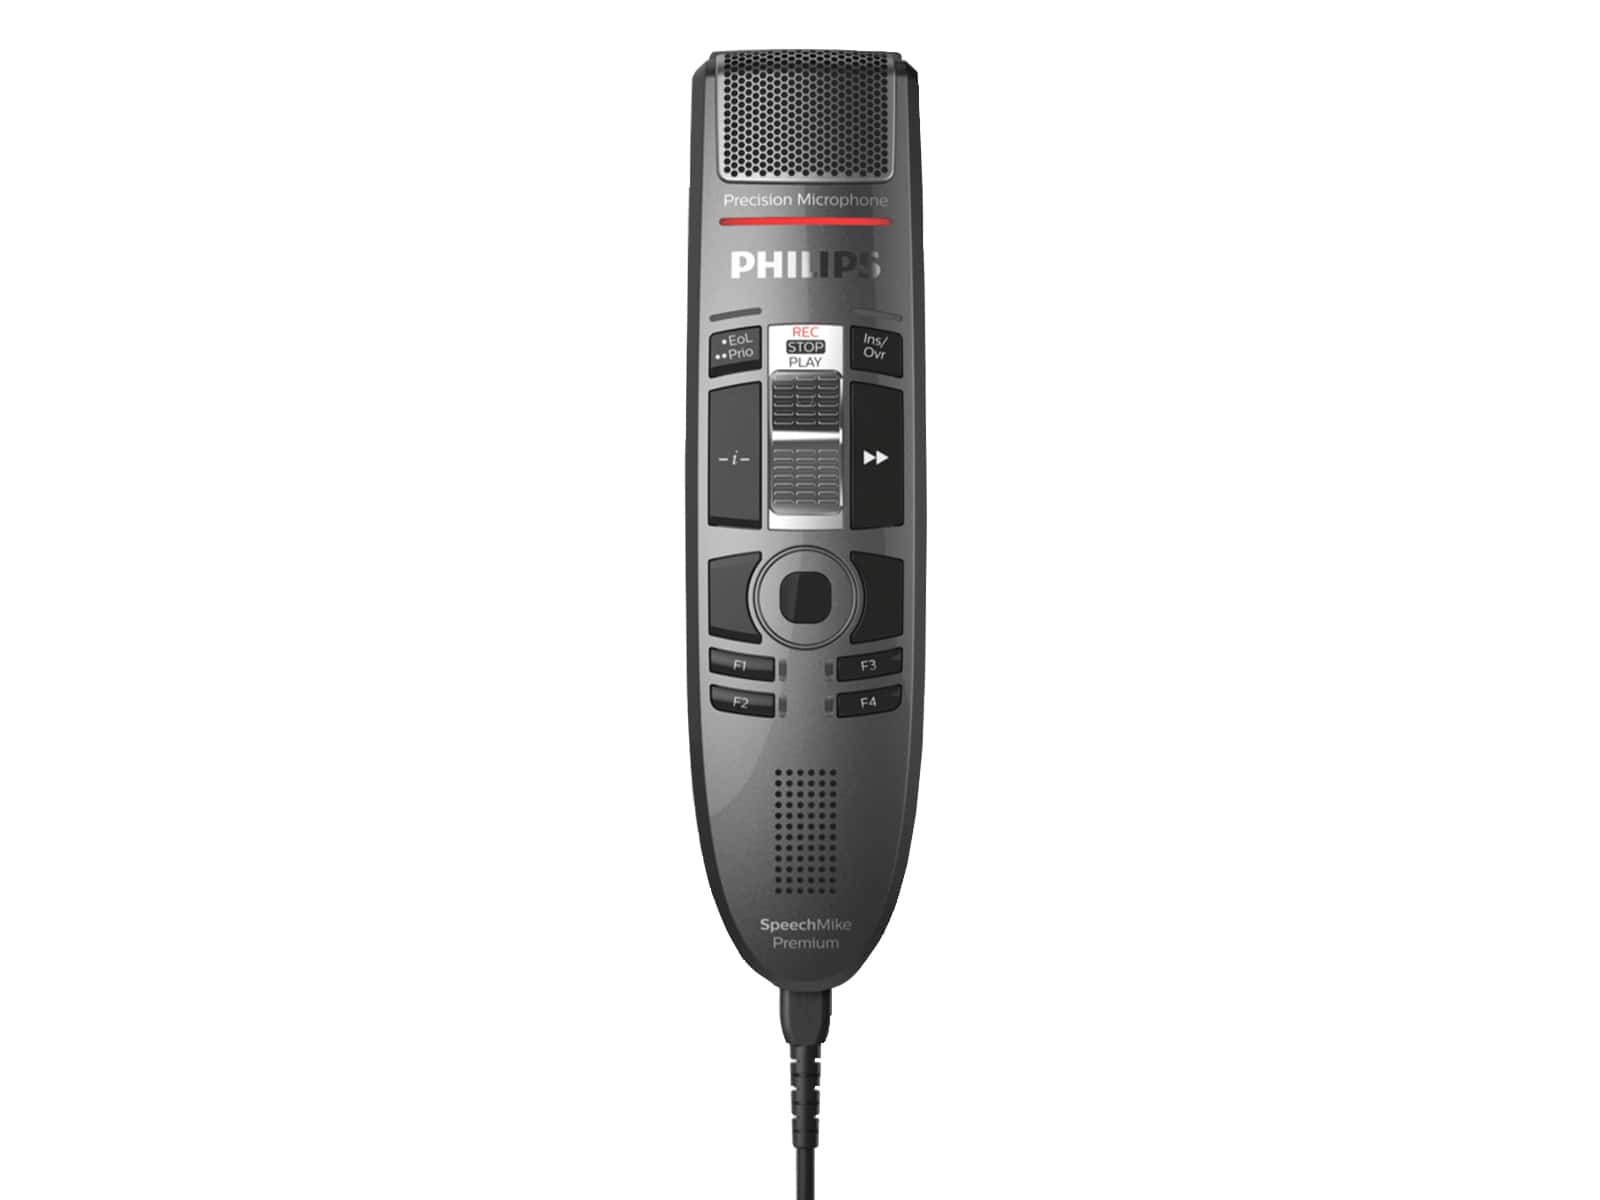 Philips SpeechMike Premium Touch Slide Switch Dictation Microphone (SMP3710) Monitors.com 